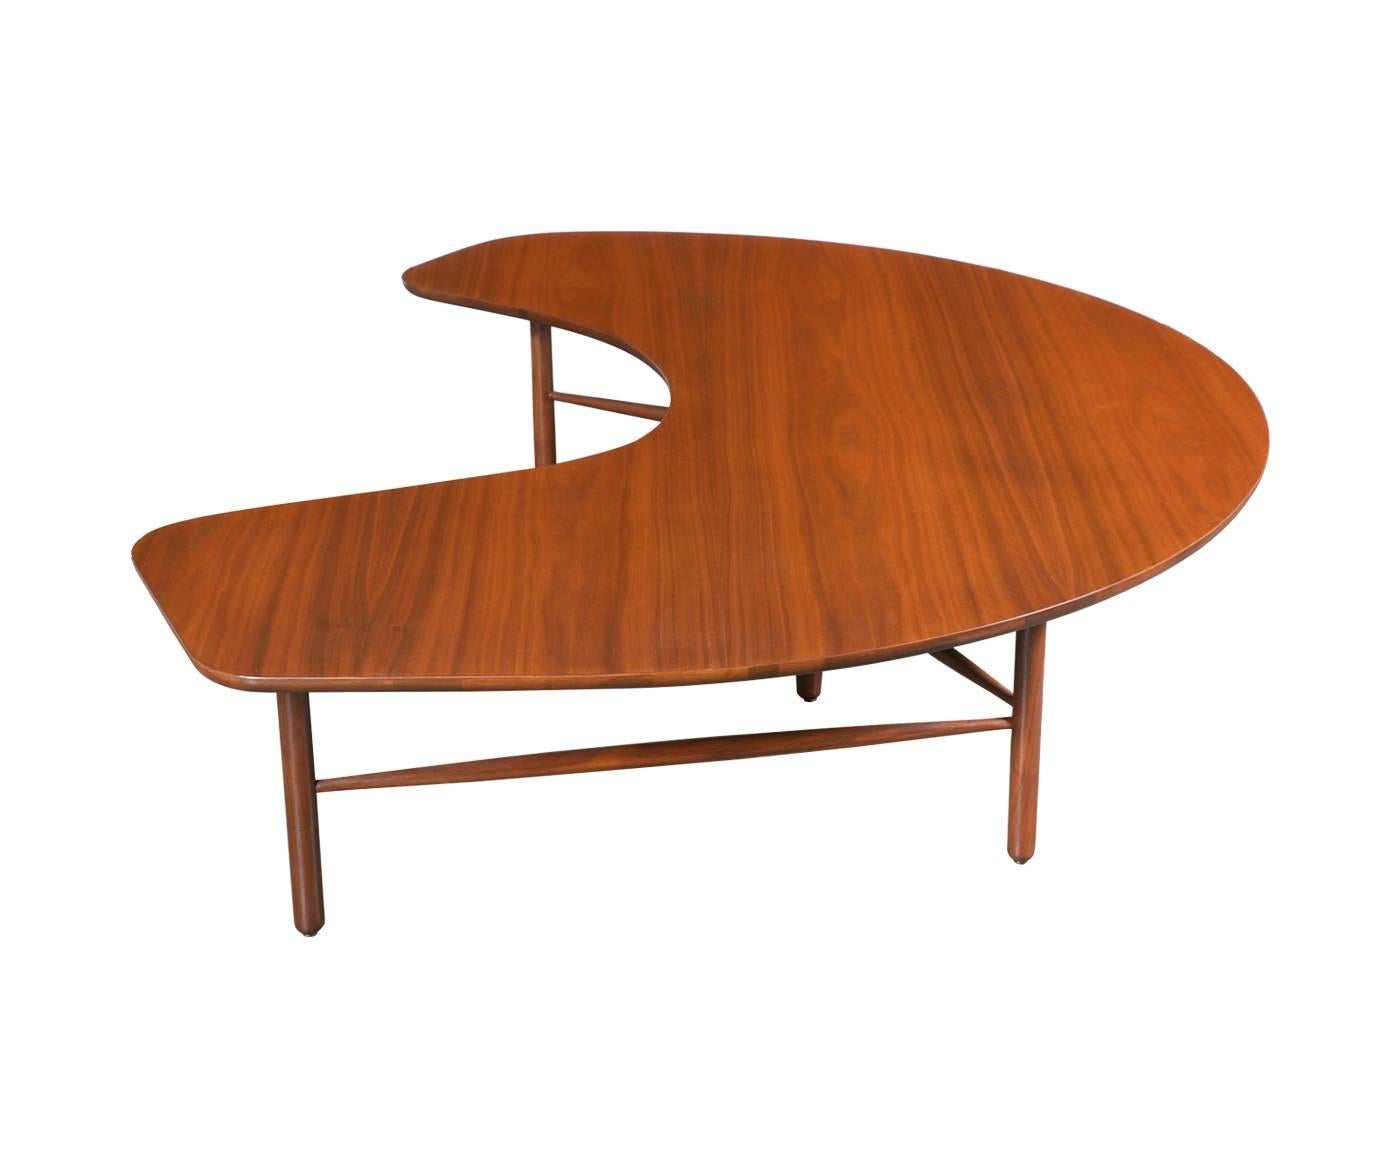 Designer: Greta M. Grossman.
Manufacturer: Glenn of California.
Period/style: Mid-Century Modern.
Country: United States.
Date: 1952.

Dimensions: 14.25″ H x 60″ L x 44″ W.
Materials: Walnut.
Condition: Excellent, newly refinished.
Number